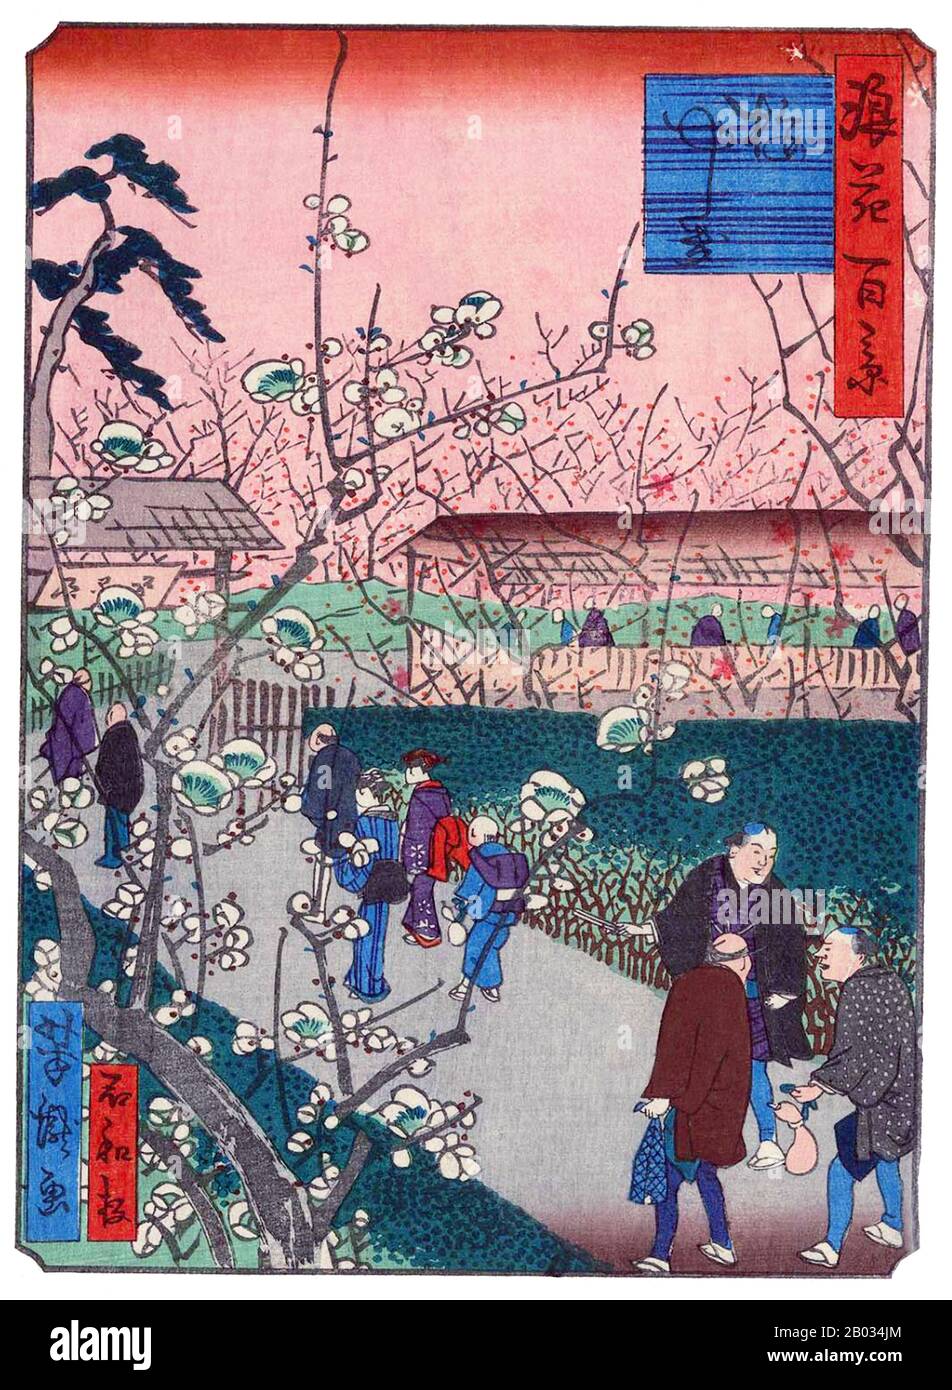 Utagawa Yoshitaki ( April 13, 1841 – June 28, 1899), also known as Ichiyosai Yoshitaki, was a designer of ukiyo-e style Japanese woodblock prints. He was active in both Edo (Tokyo) and Osaka and was also a painter and newspaper illustrator.  Yoshitaki was a student of Utagawa Yoshiume (1819–1879). He became the most prolific designer of woodblock prints in Osaka from the 1860s to the 1880s, producing more than 1,200 different prints, almost all of kabuki actors. Stock Photo